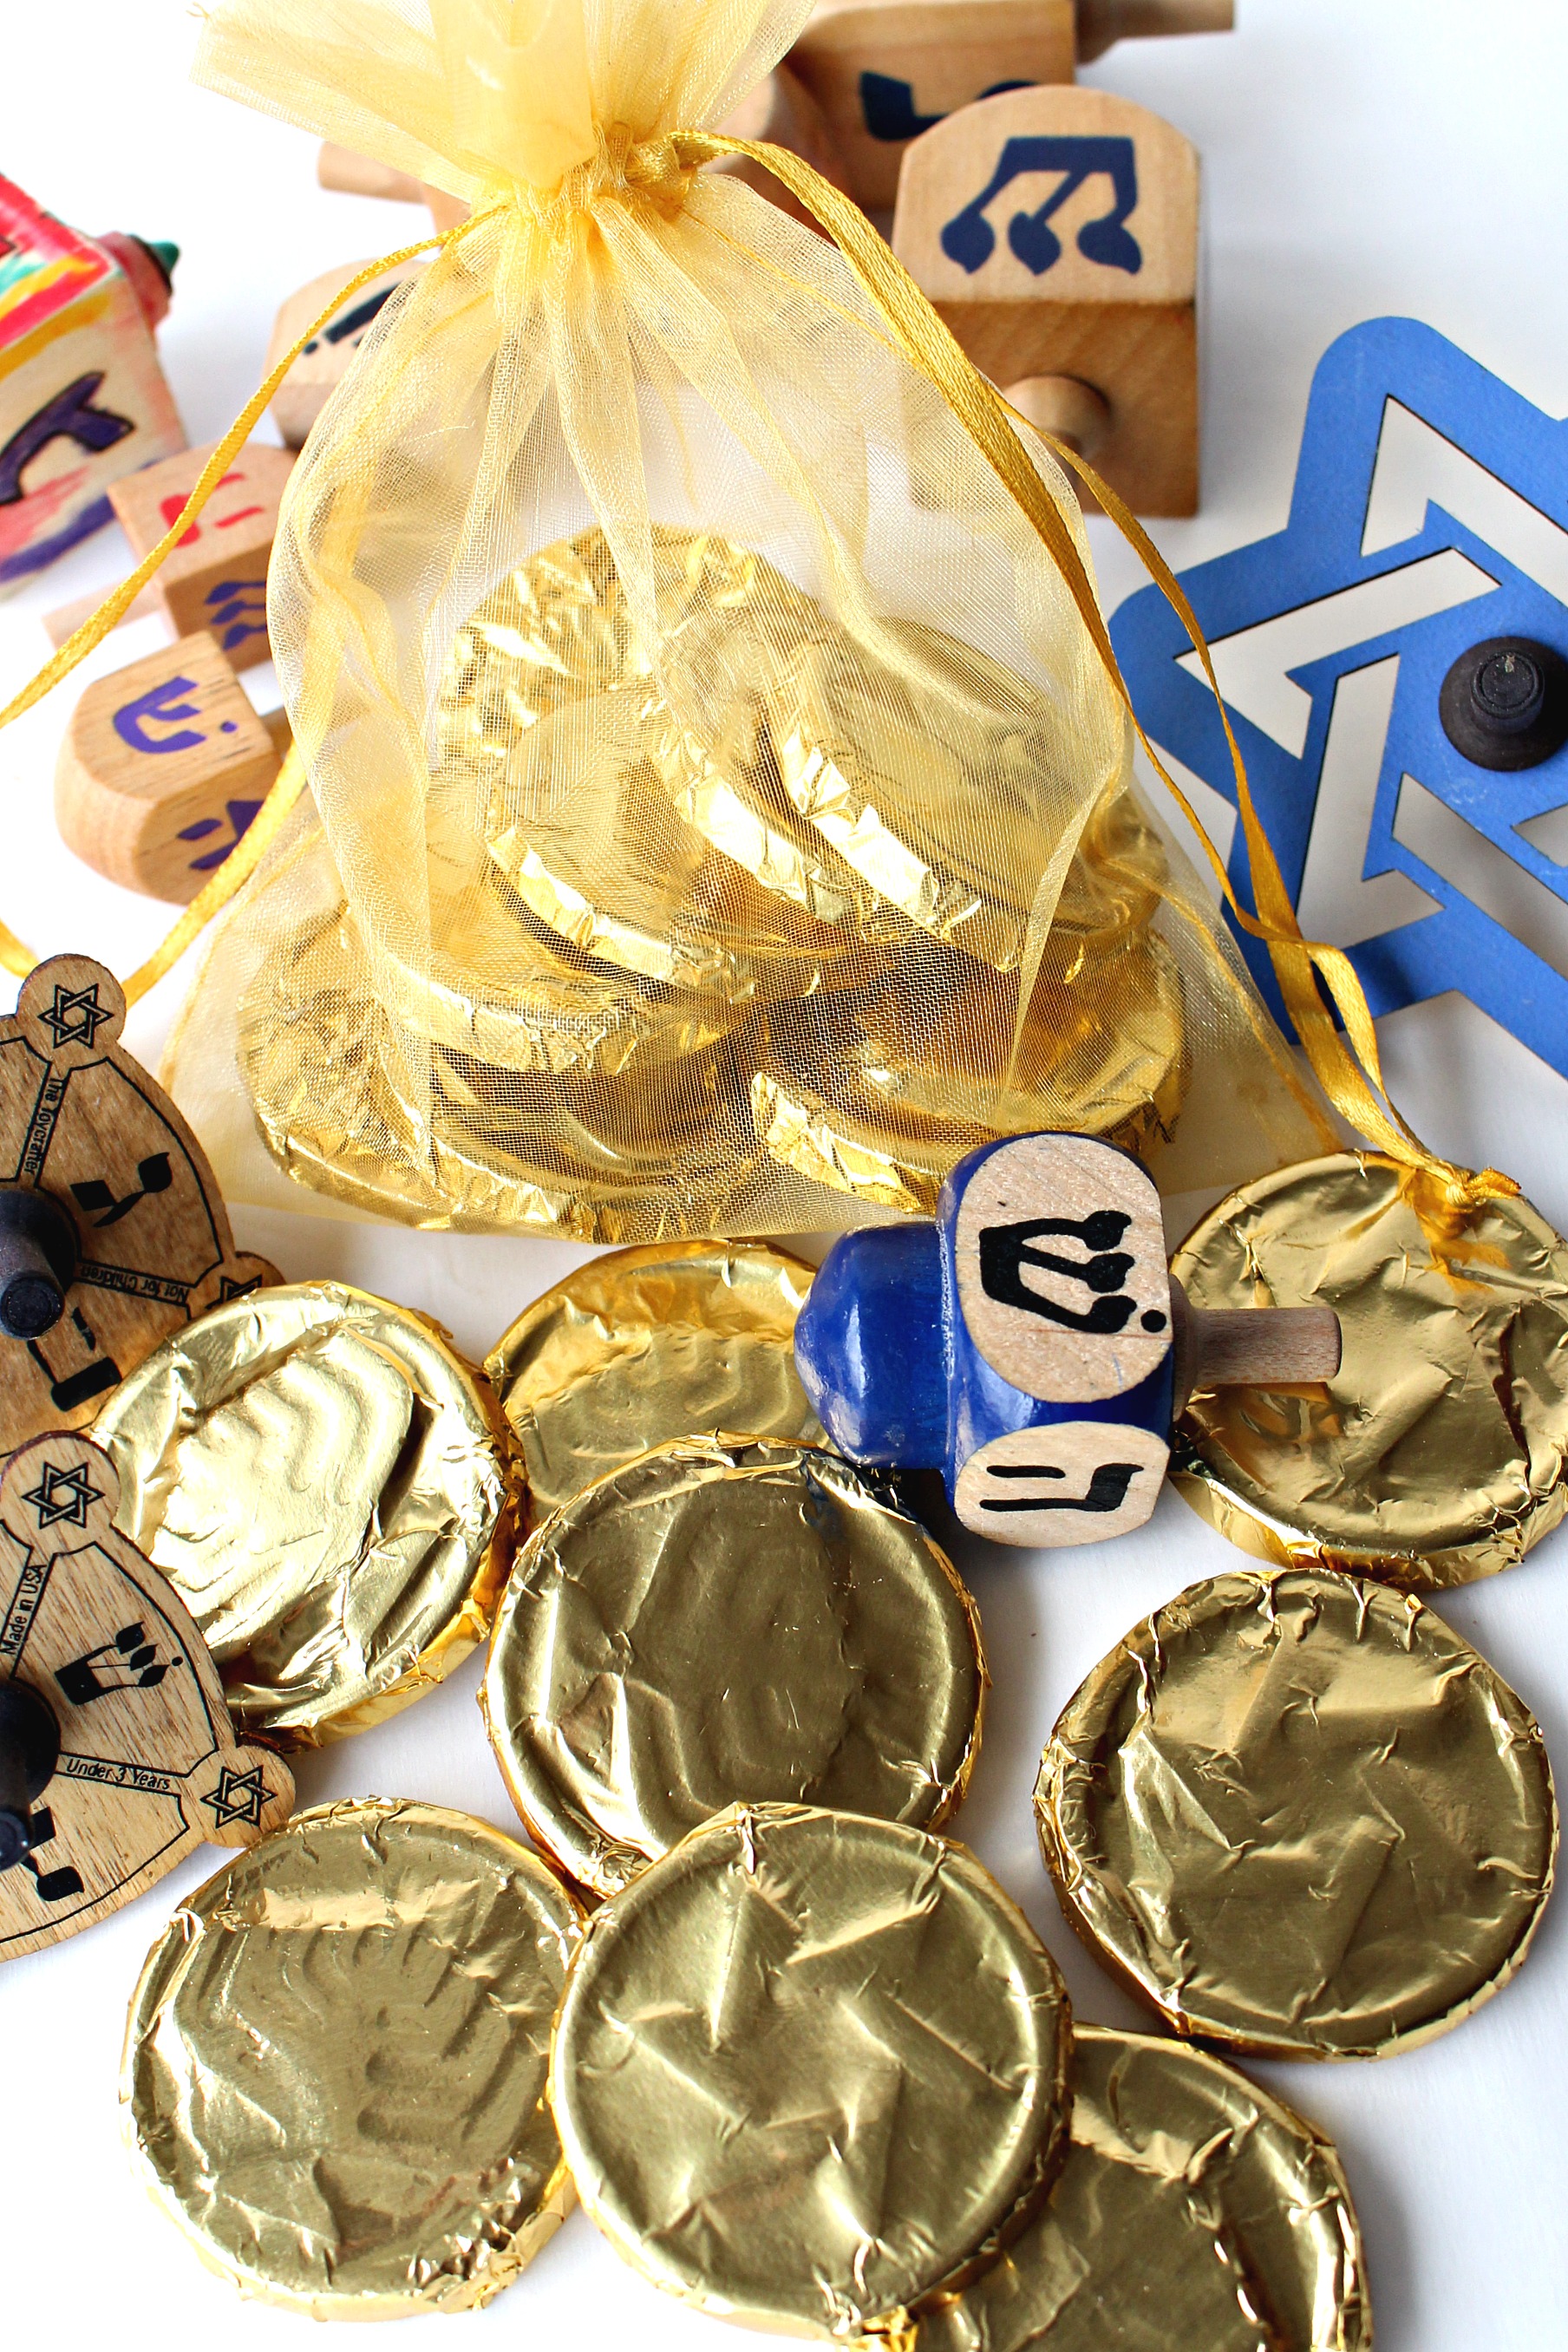 Gold foil wrapped Homemade Chocolate Coins (Hanukkah Gelt) with small, wooden dreidels